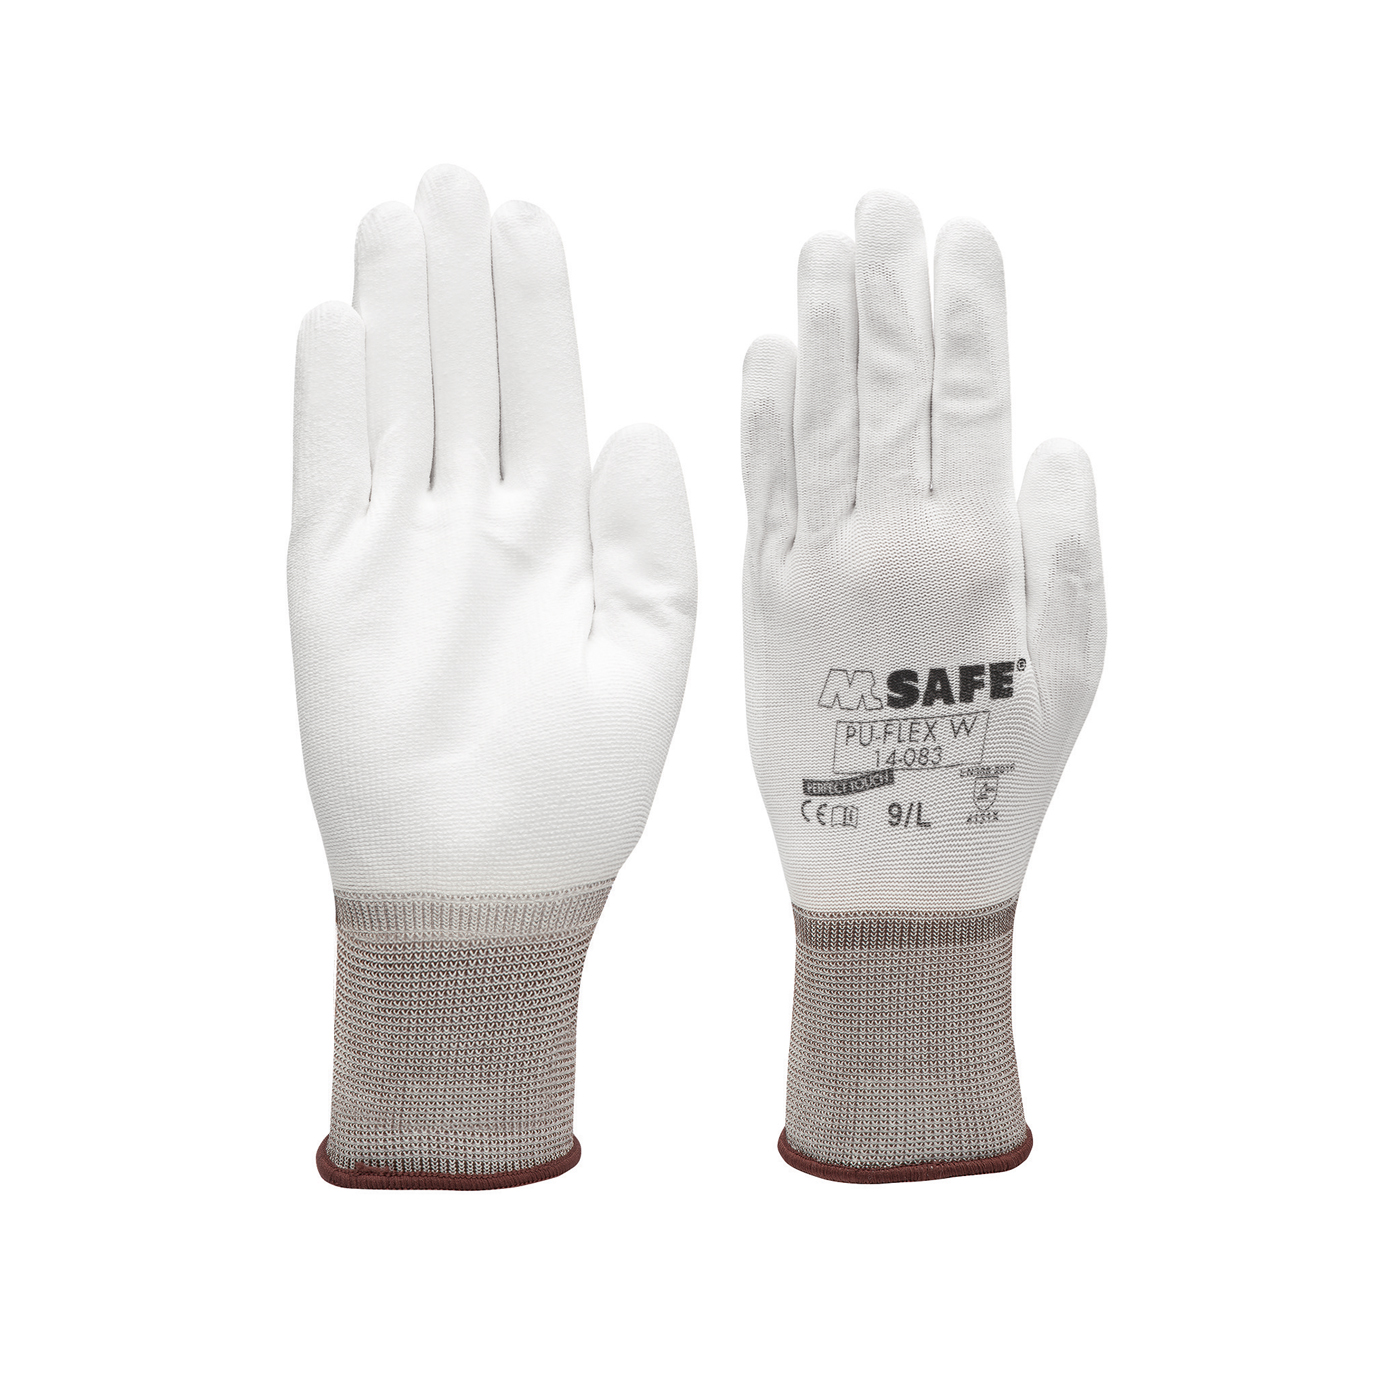 Polishing Gloves, Size L, White with brown Wristband - 1 pair